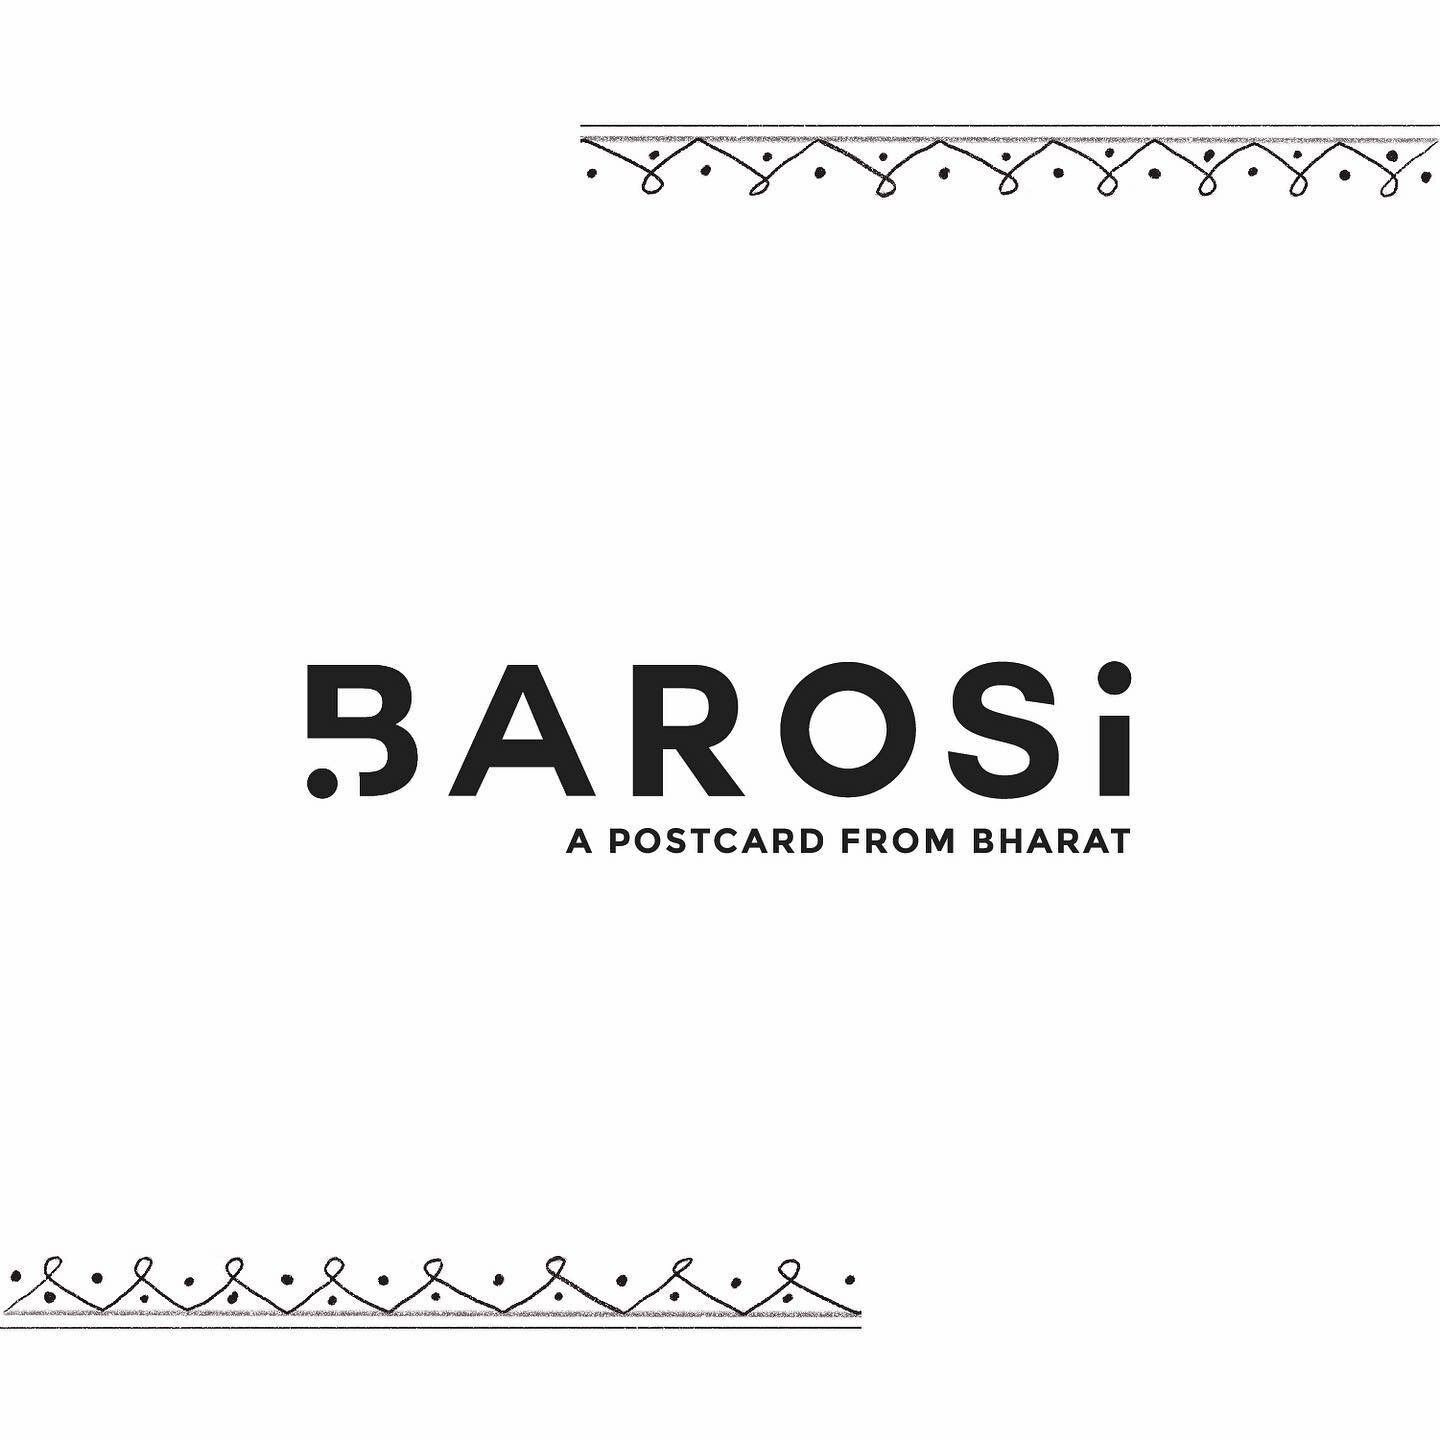 A postcard from Bharat!
&bull;
@barosifarms is a brand rooted in their traditions, filled with goodness, made authentically &amp; traditionally and truly good for you deserved their story to be told!
&bull;
&bull;
We wanted to show how different rura